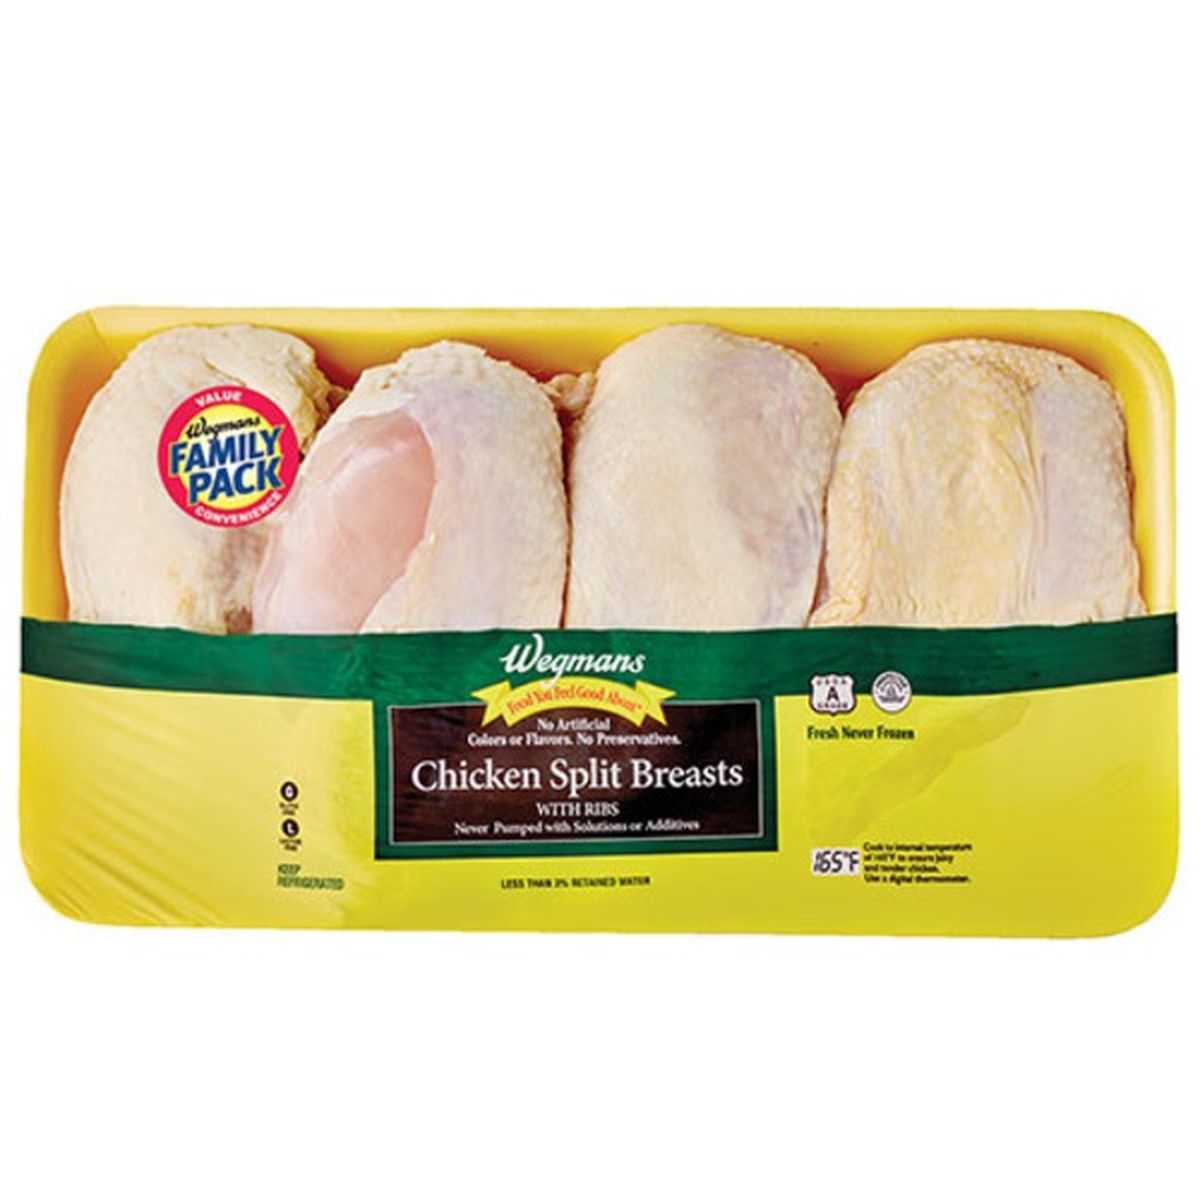 Calories in Wegmans Chicken Split Breasts with Ribs, FAMILY PACK